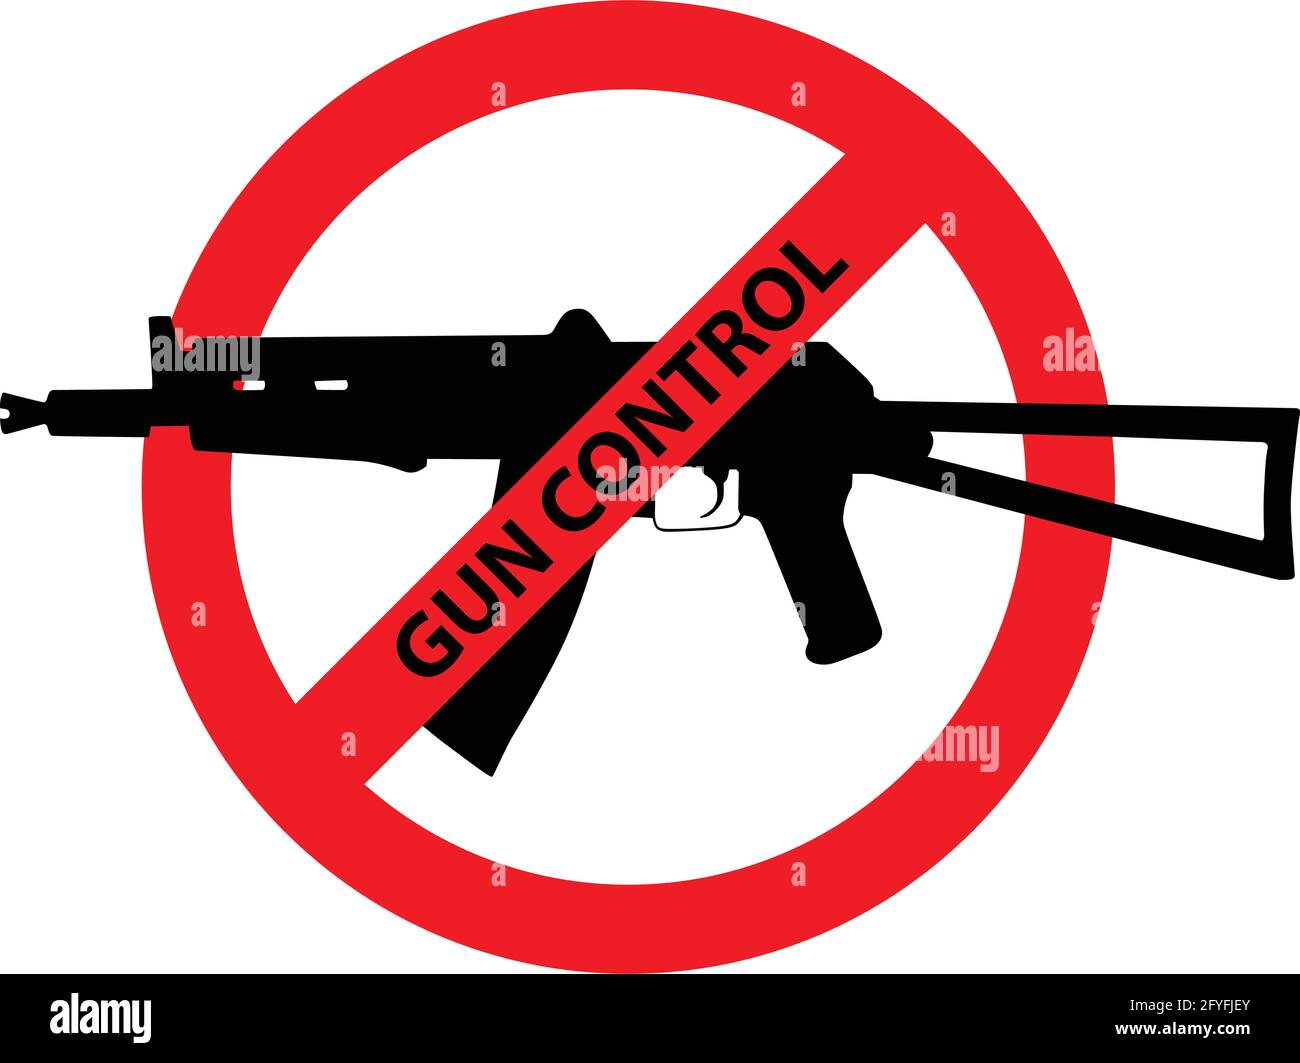 Caution sign about gun control. Restricted area, guns banned. Vector image silhouette, illustration isolated on white background. Stock Vector